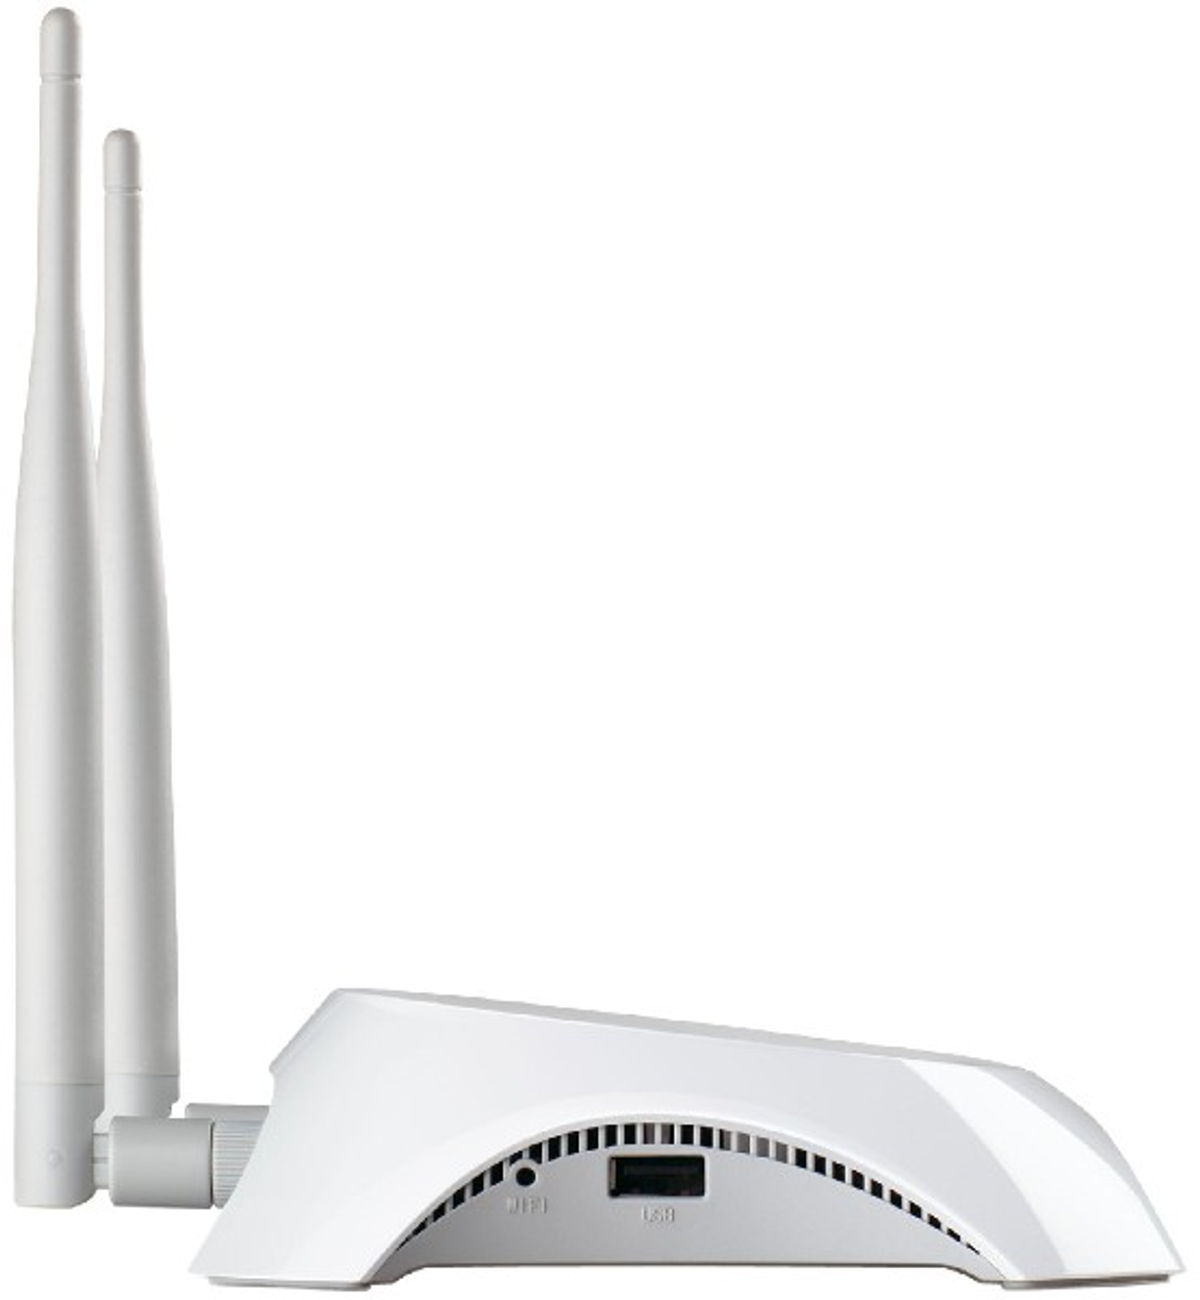 TL-MR3420 TP-LINK 3G/4G WLAN Router WLAN Router